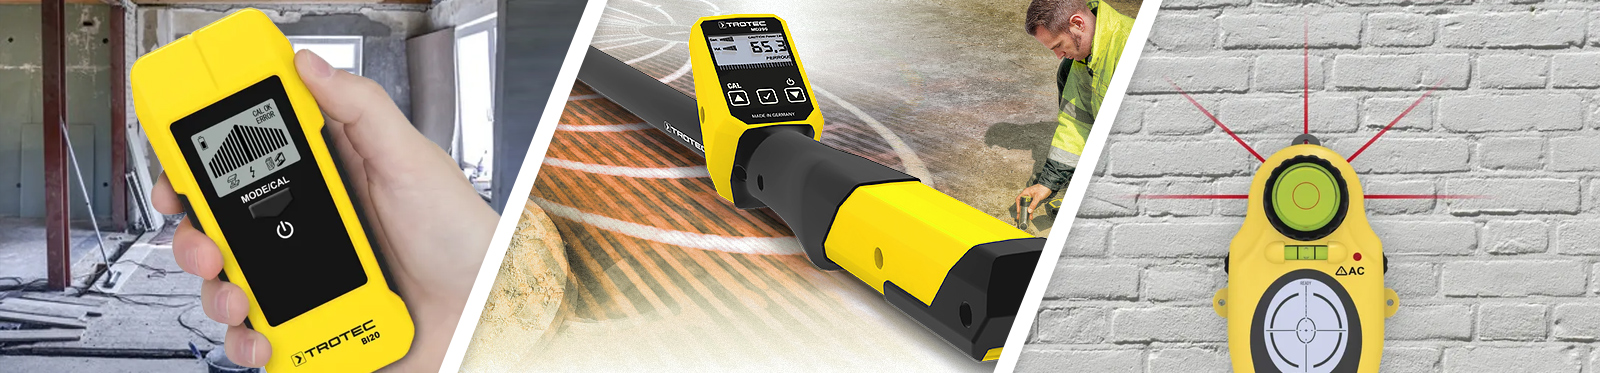 Measuring devices from Trotec for cable and route detection and localisation